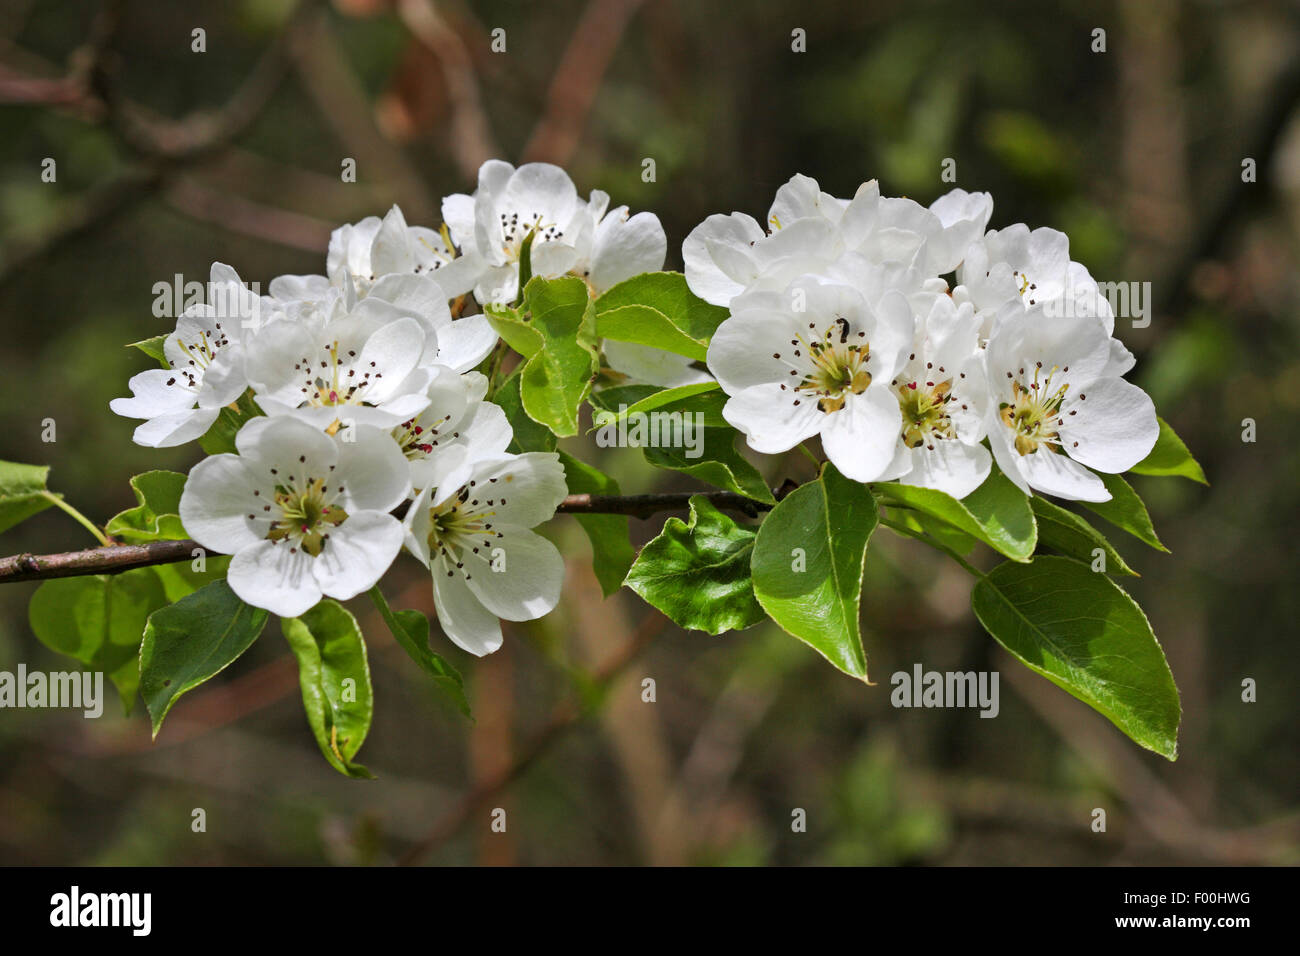 European Wild Pear, Wild Pear (Pyrus pyraster), blooming branch, Germany Stock Photo